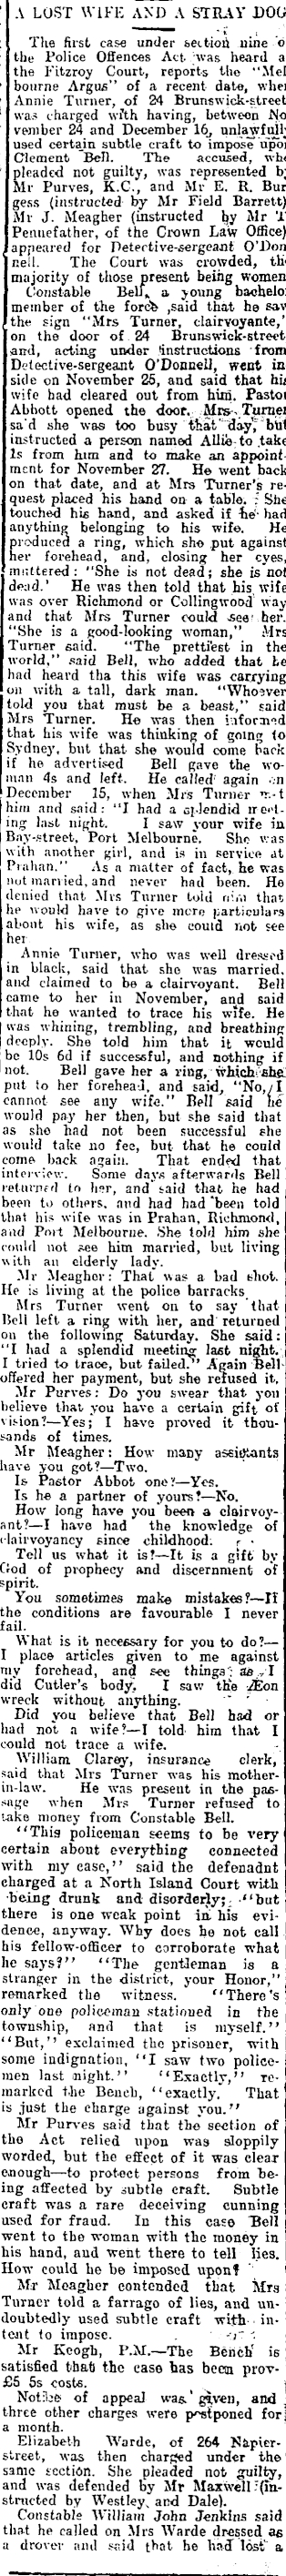 Papers Past Newspapers Nelson Evening Mail 12 February 1909 Clairvoyants In Court